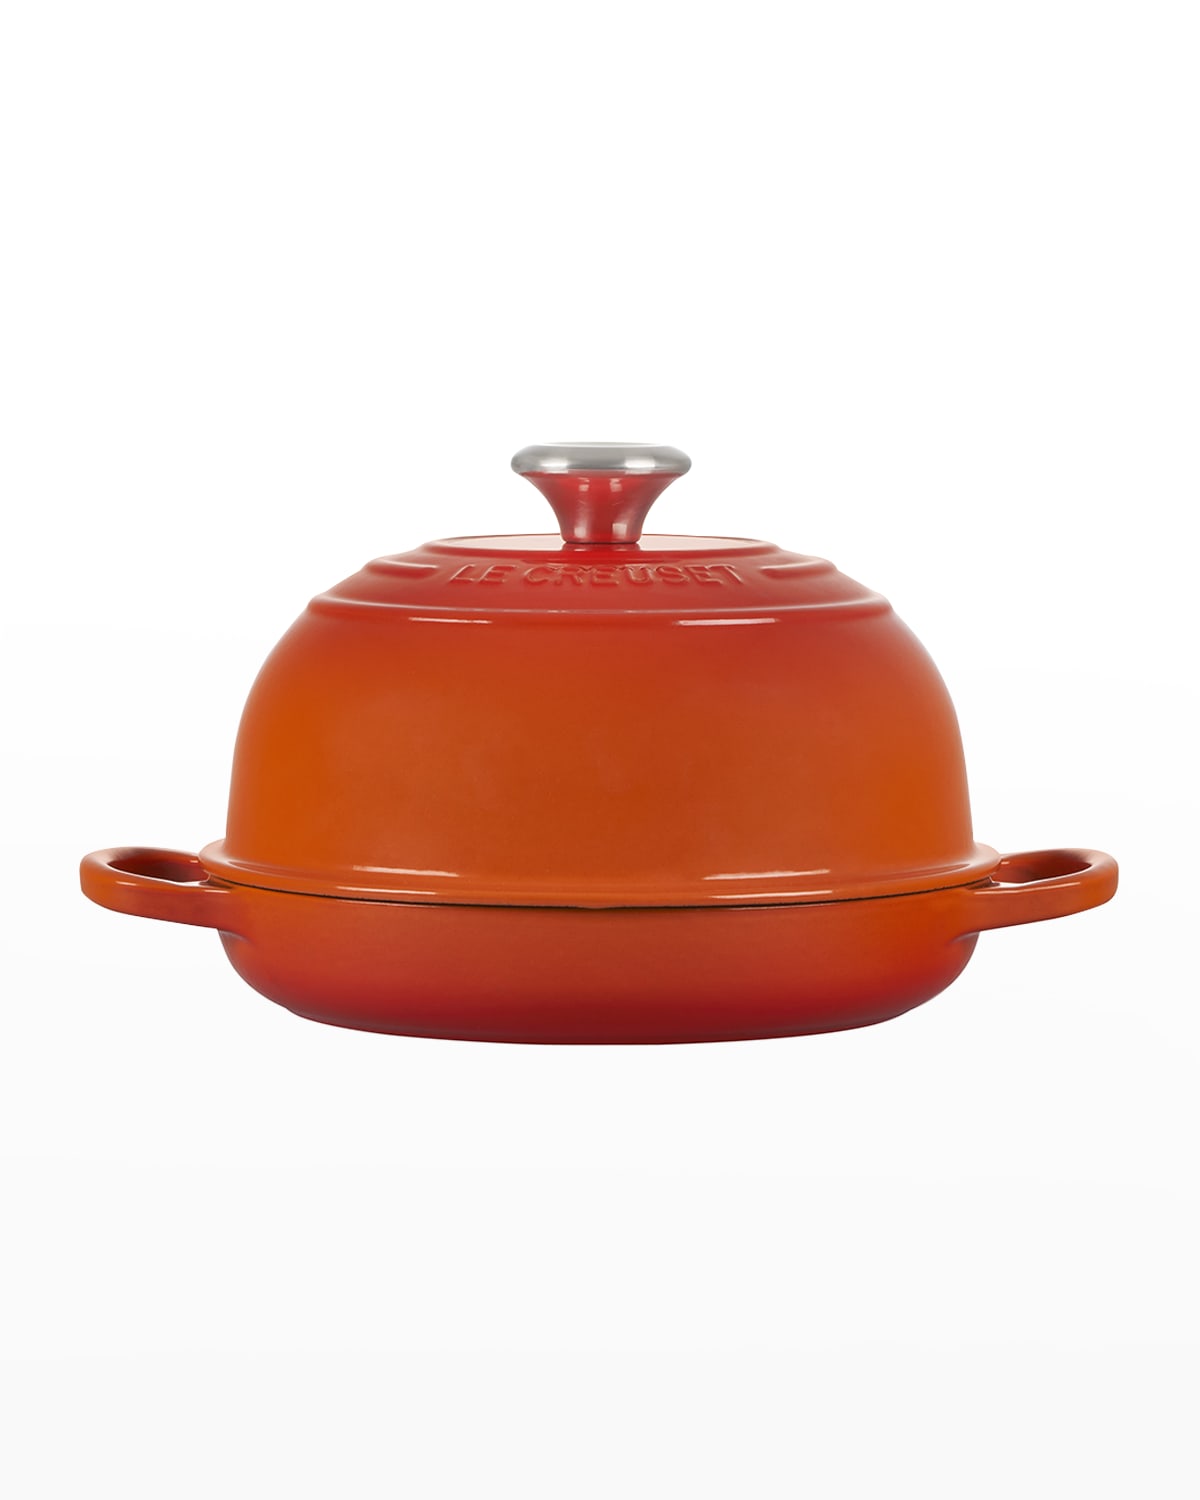 Le Creuset Signature 9.5" Bread Oven In Flame